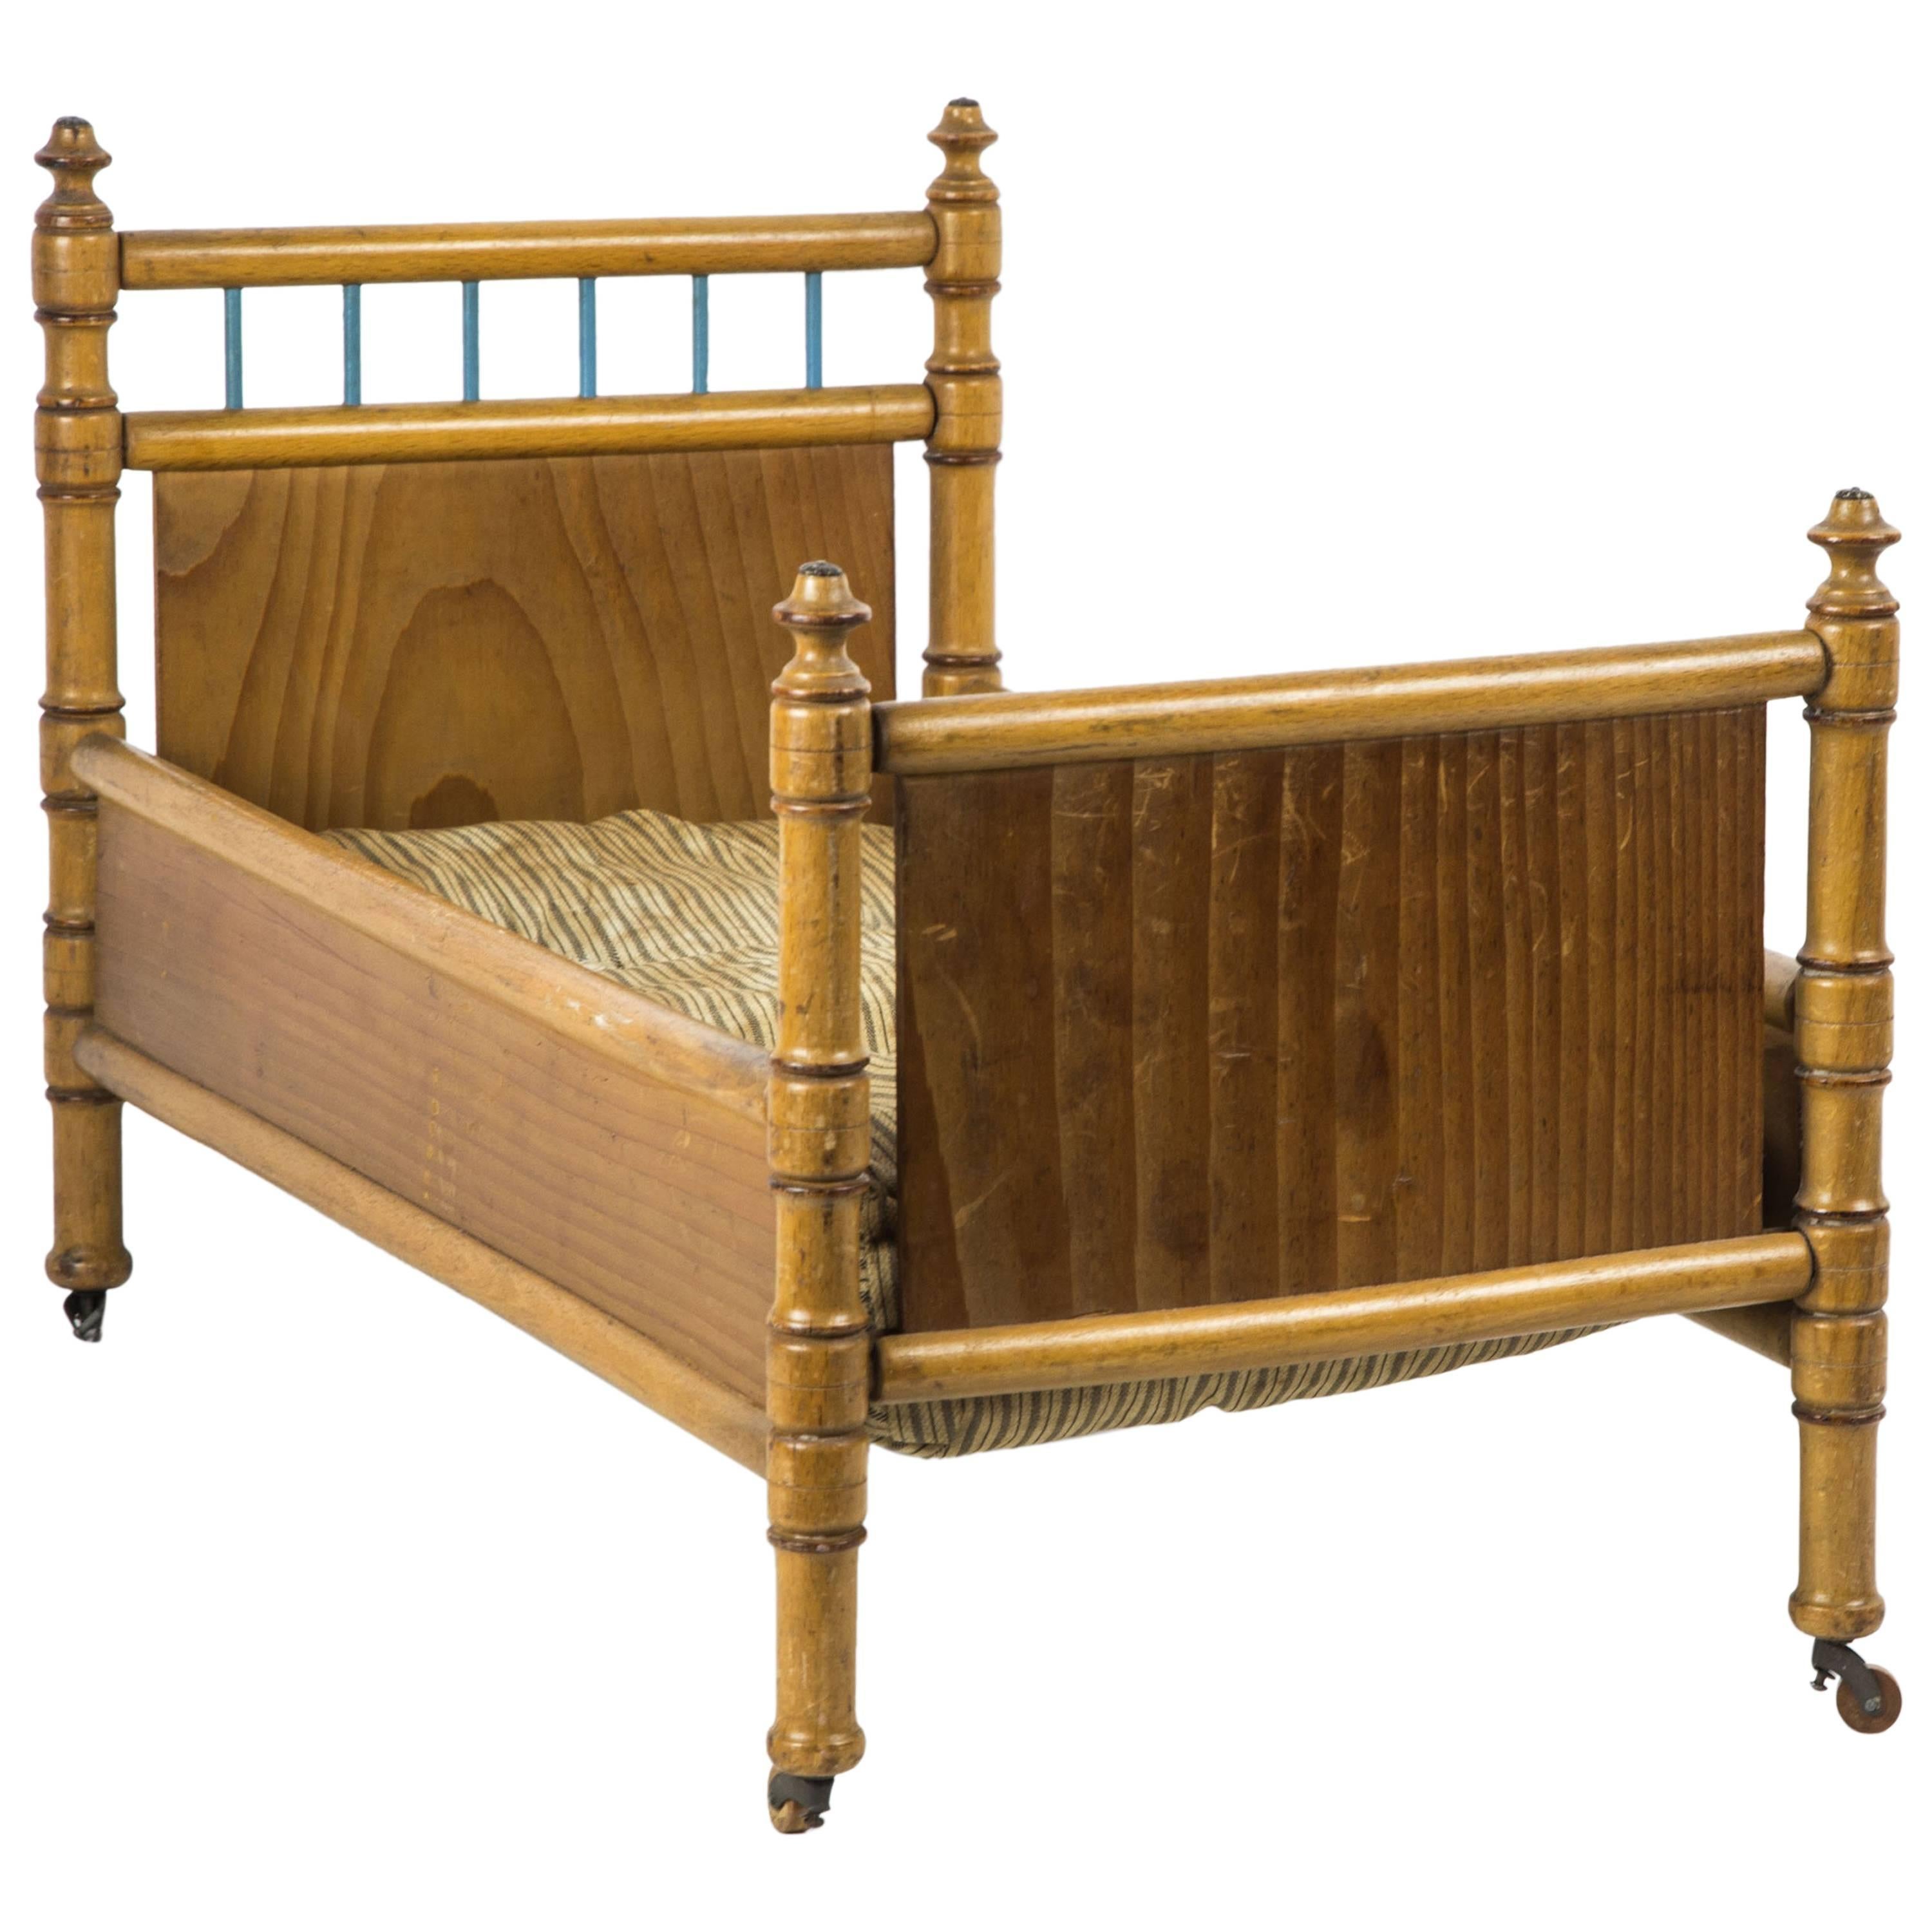 Miniature Pine and Maple Doll's Bed Furniture, France